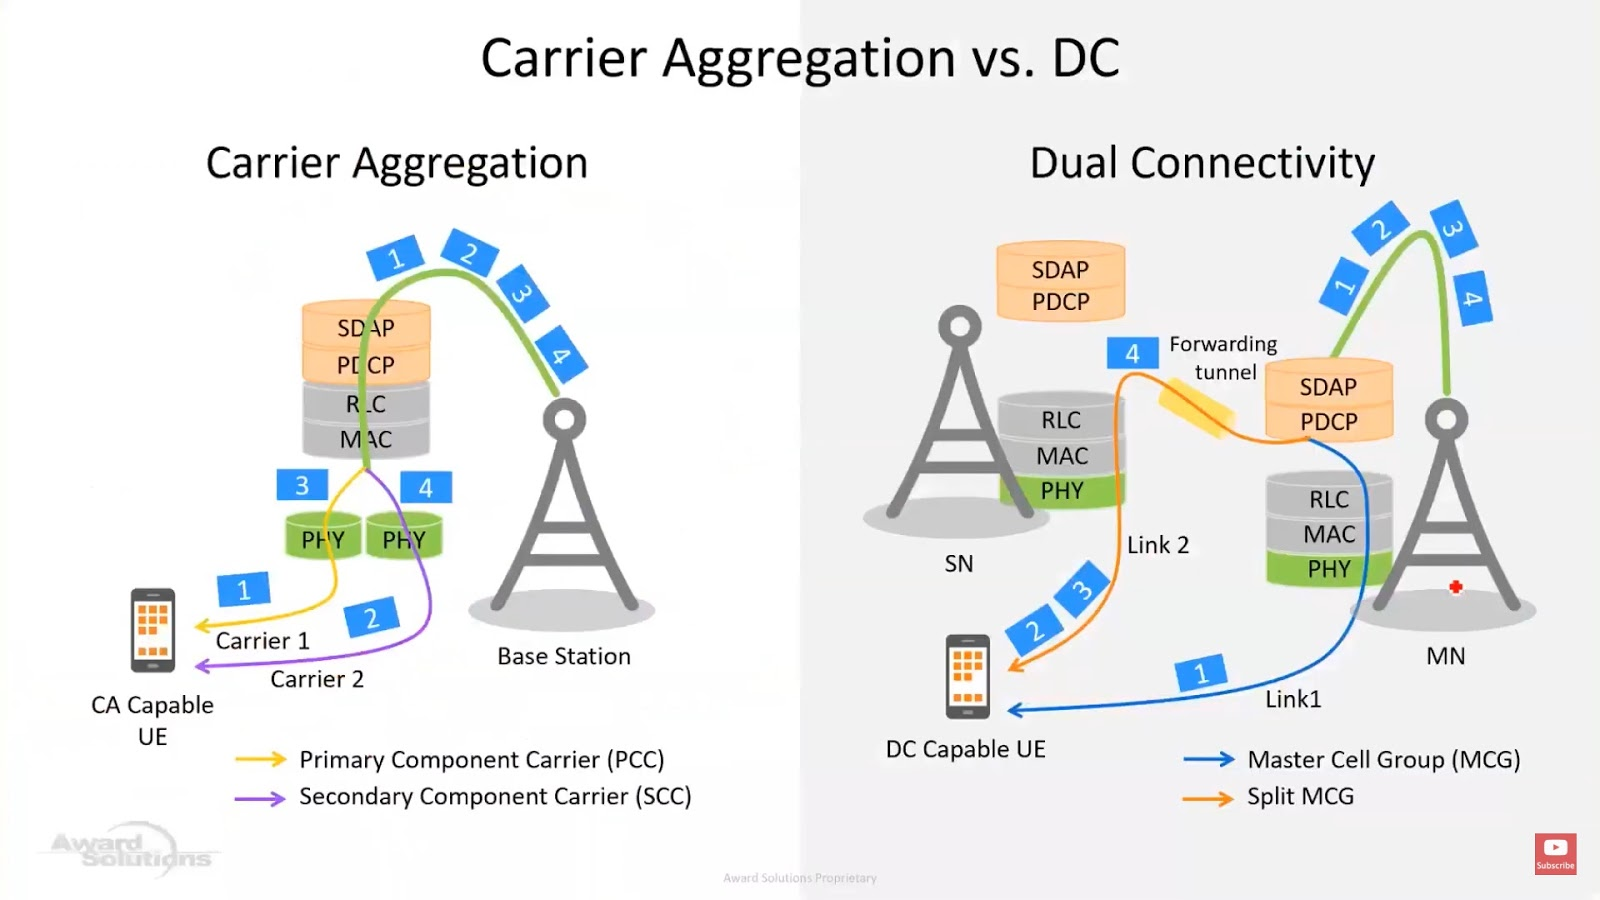 What is difference between carrier aggregation and dual connectivity in 5G?